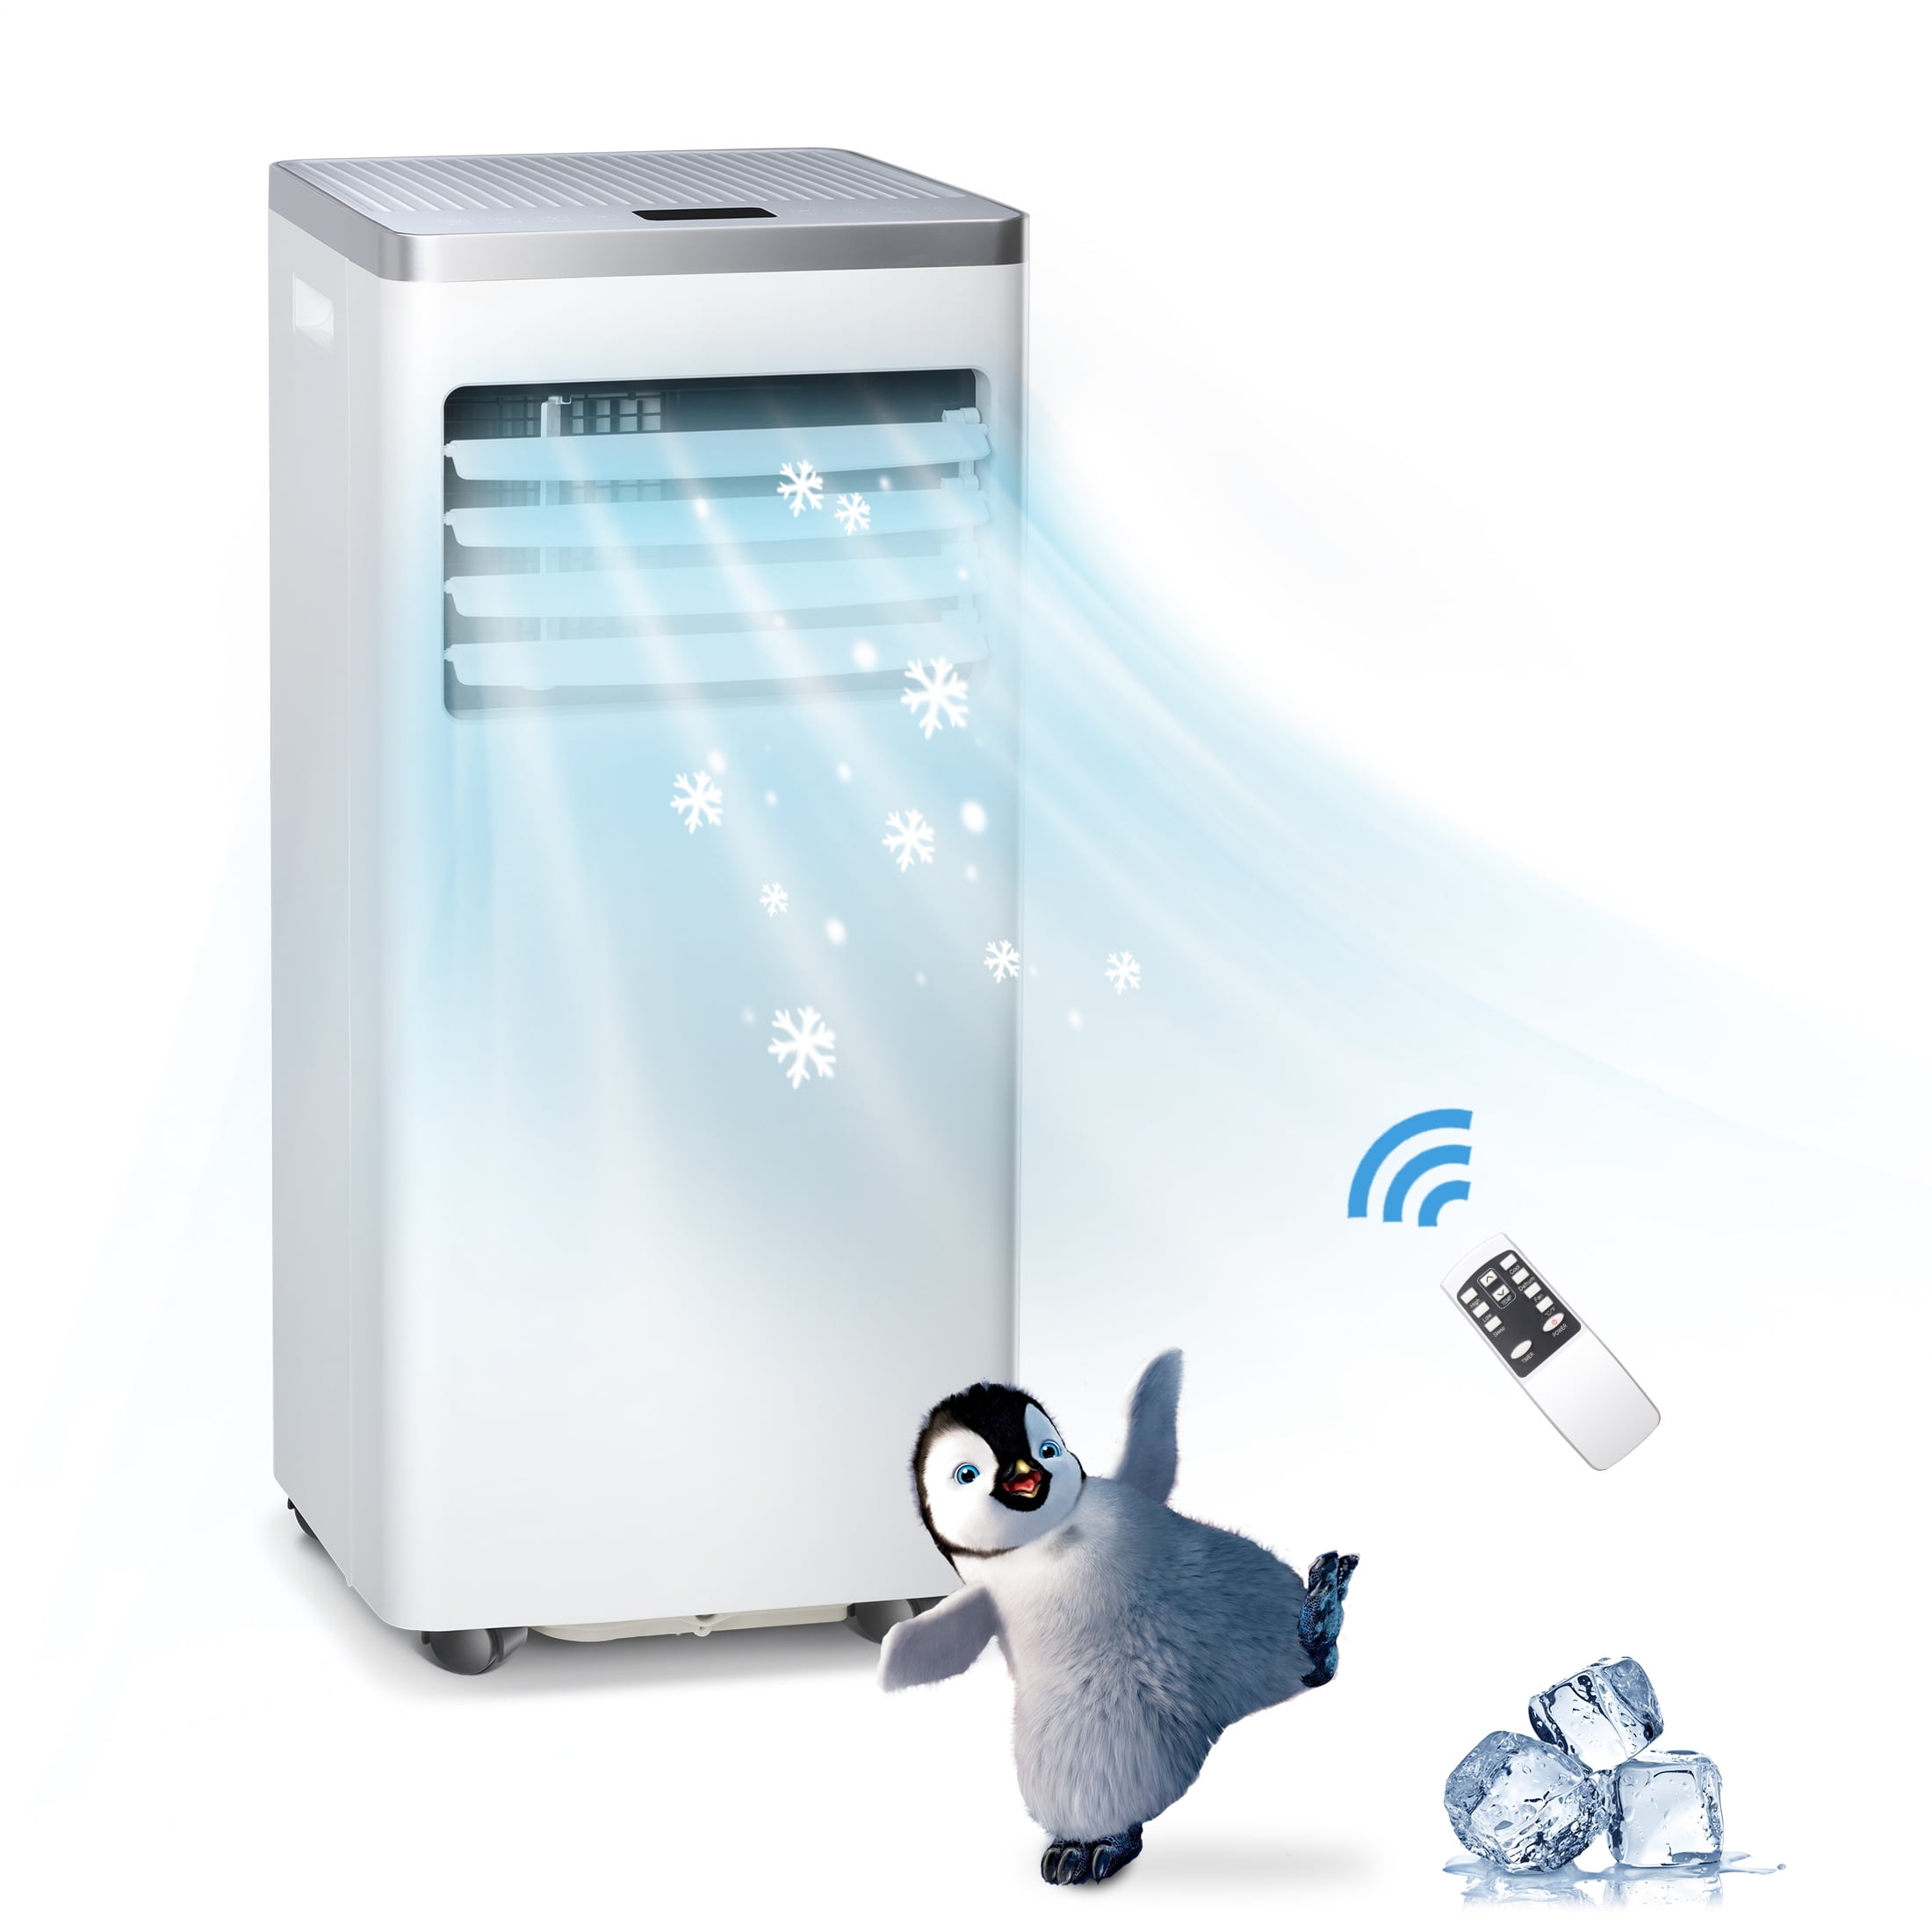 RWFLAME Portable Air Conditioner8000 BTU Powerful Home AC Unit with Built  in Dehumidifier Fan ModeCools 350 SqFtFunctional Portable AC with Remote  Control24Hrs TimerInstallation Kit White｜TikTok Search